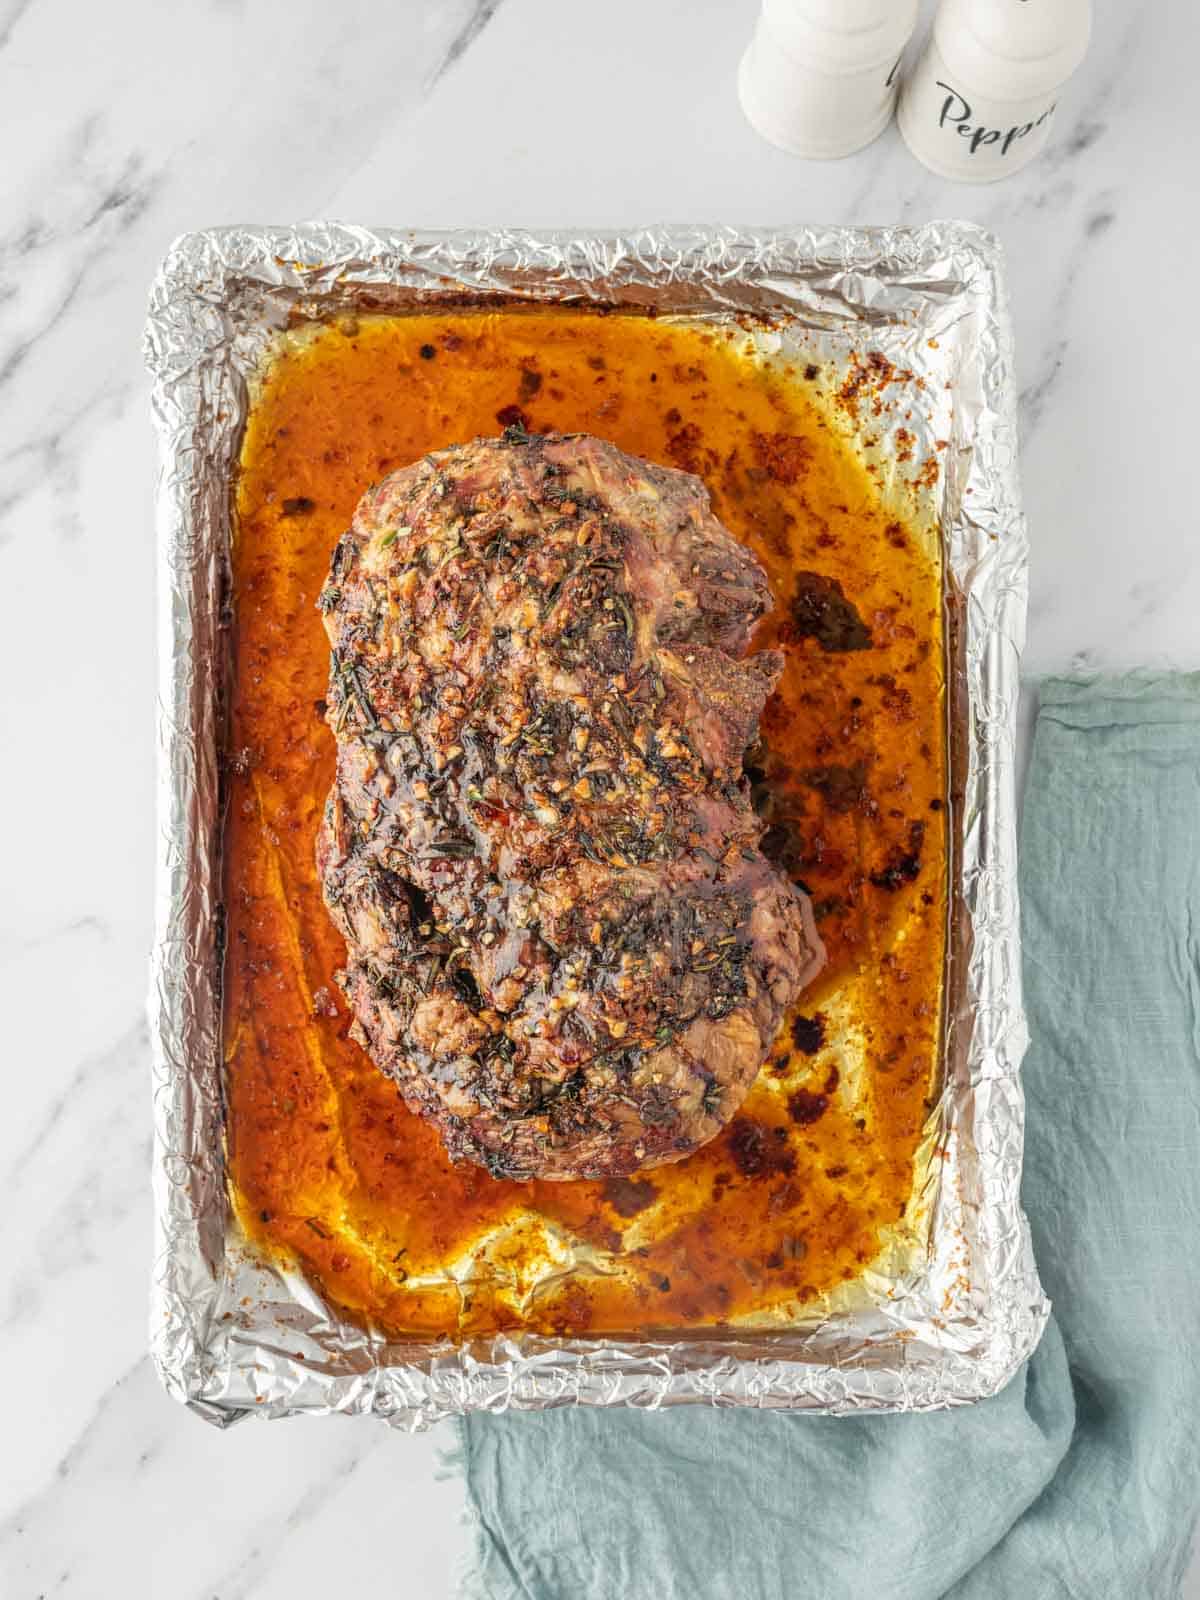 Roasted leg of lamb in its juices in a baking dish lined with foil.